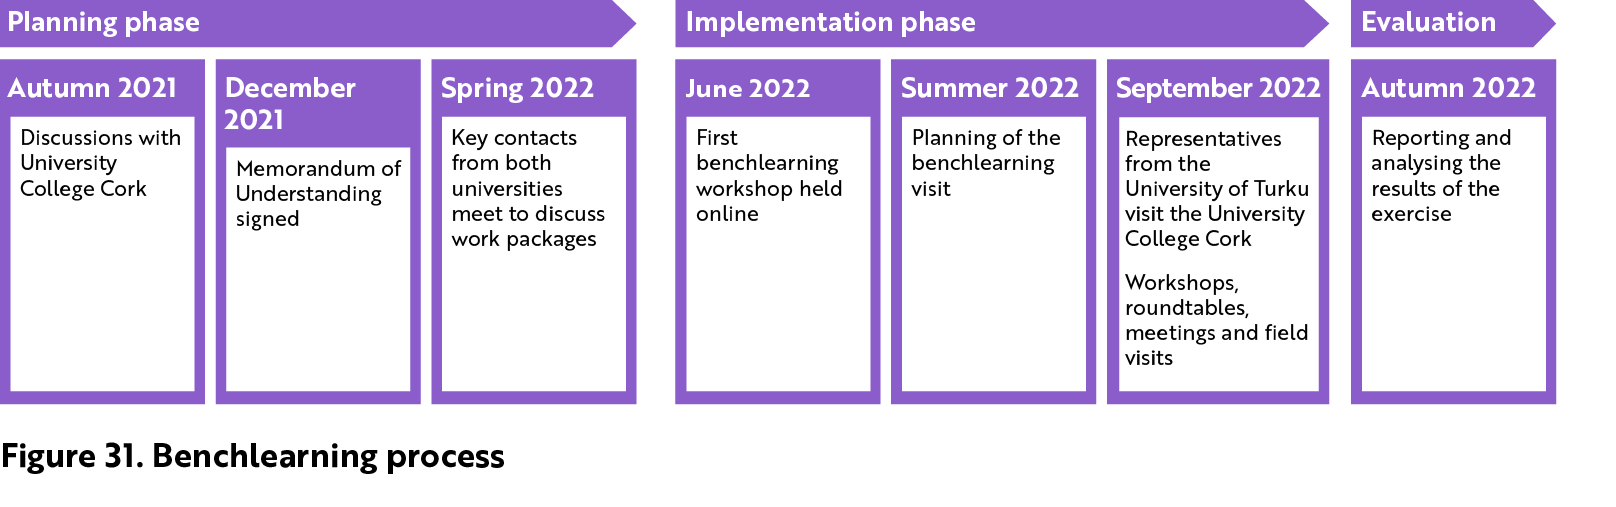 Planning phase. In autumn 2021 discussions with University College Cork. In December 2021 Memorandum of Understanding is signed. In spring 2022 key contacts from both universities meet to discuss work packages. Implementation phase. In June 2022 first benchlearning workshop was held online. In summer 2022 planning of the benchlearning visit. In September 2022 representatives from the University of Turku visit the University College Cork. Workshops, roundtables, meetings and field visits. Evaluation. In Autumn 2022 reporting and analysing the results of the exercise.